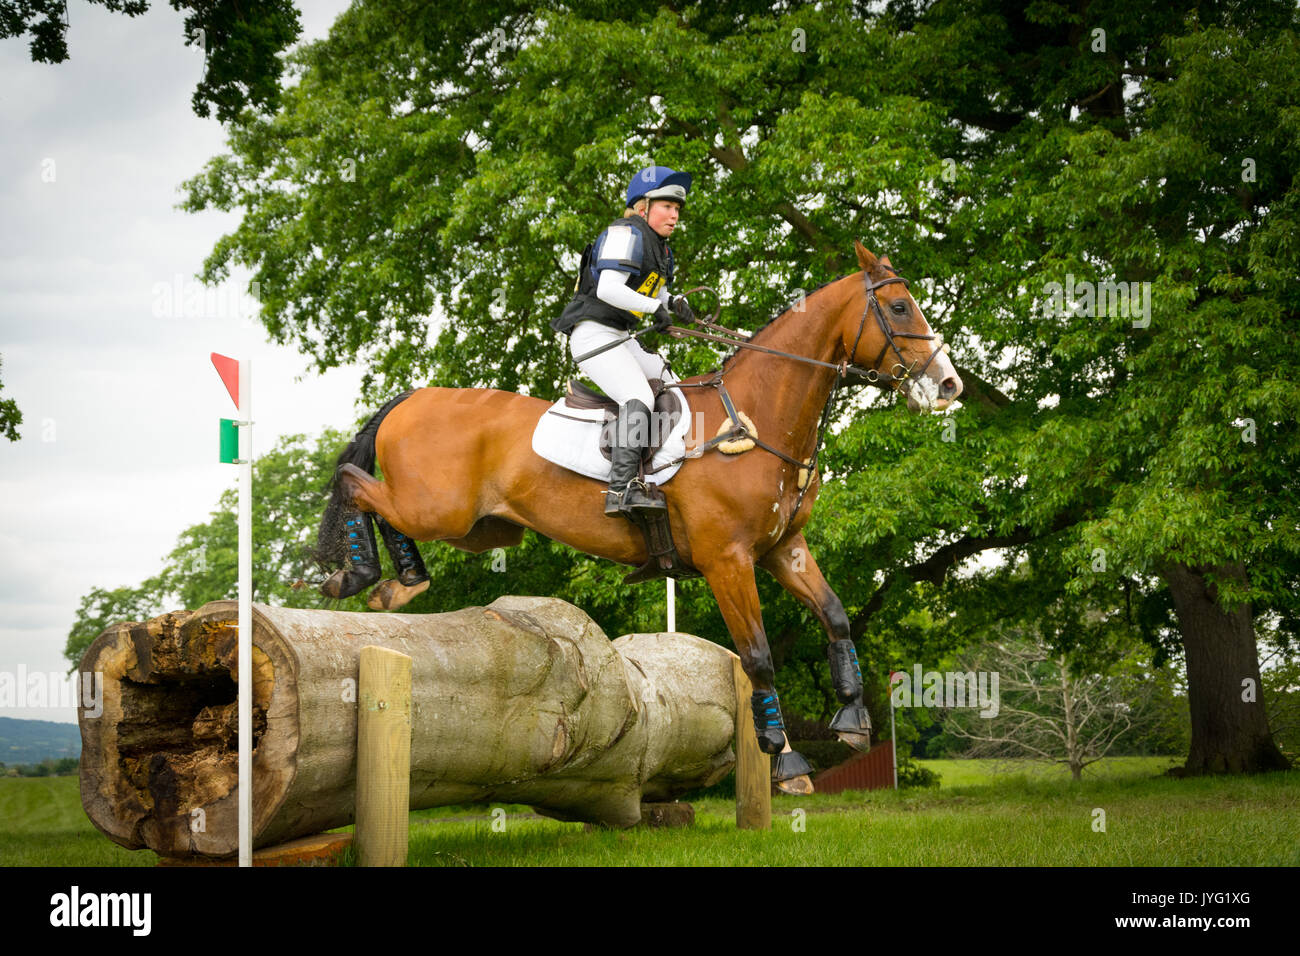 A rider performs a jump during a horse race in Somerset, UK Stock Photo